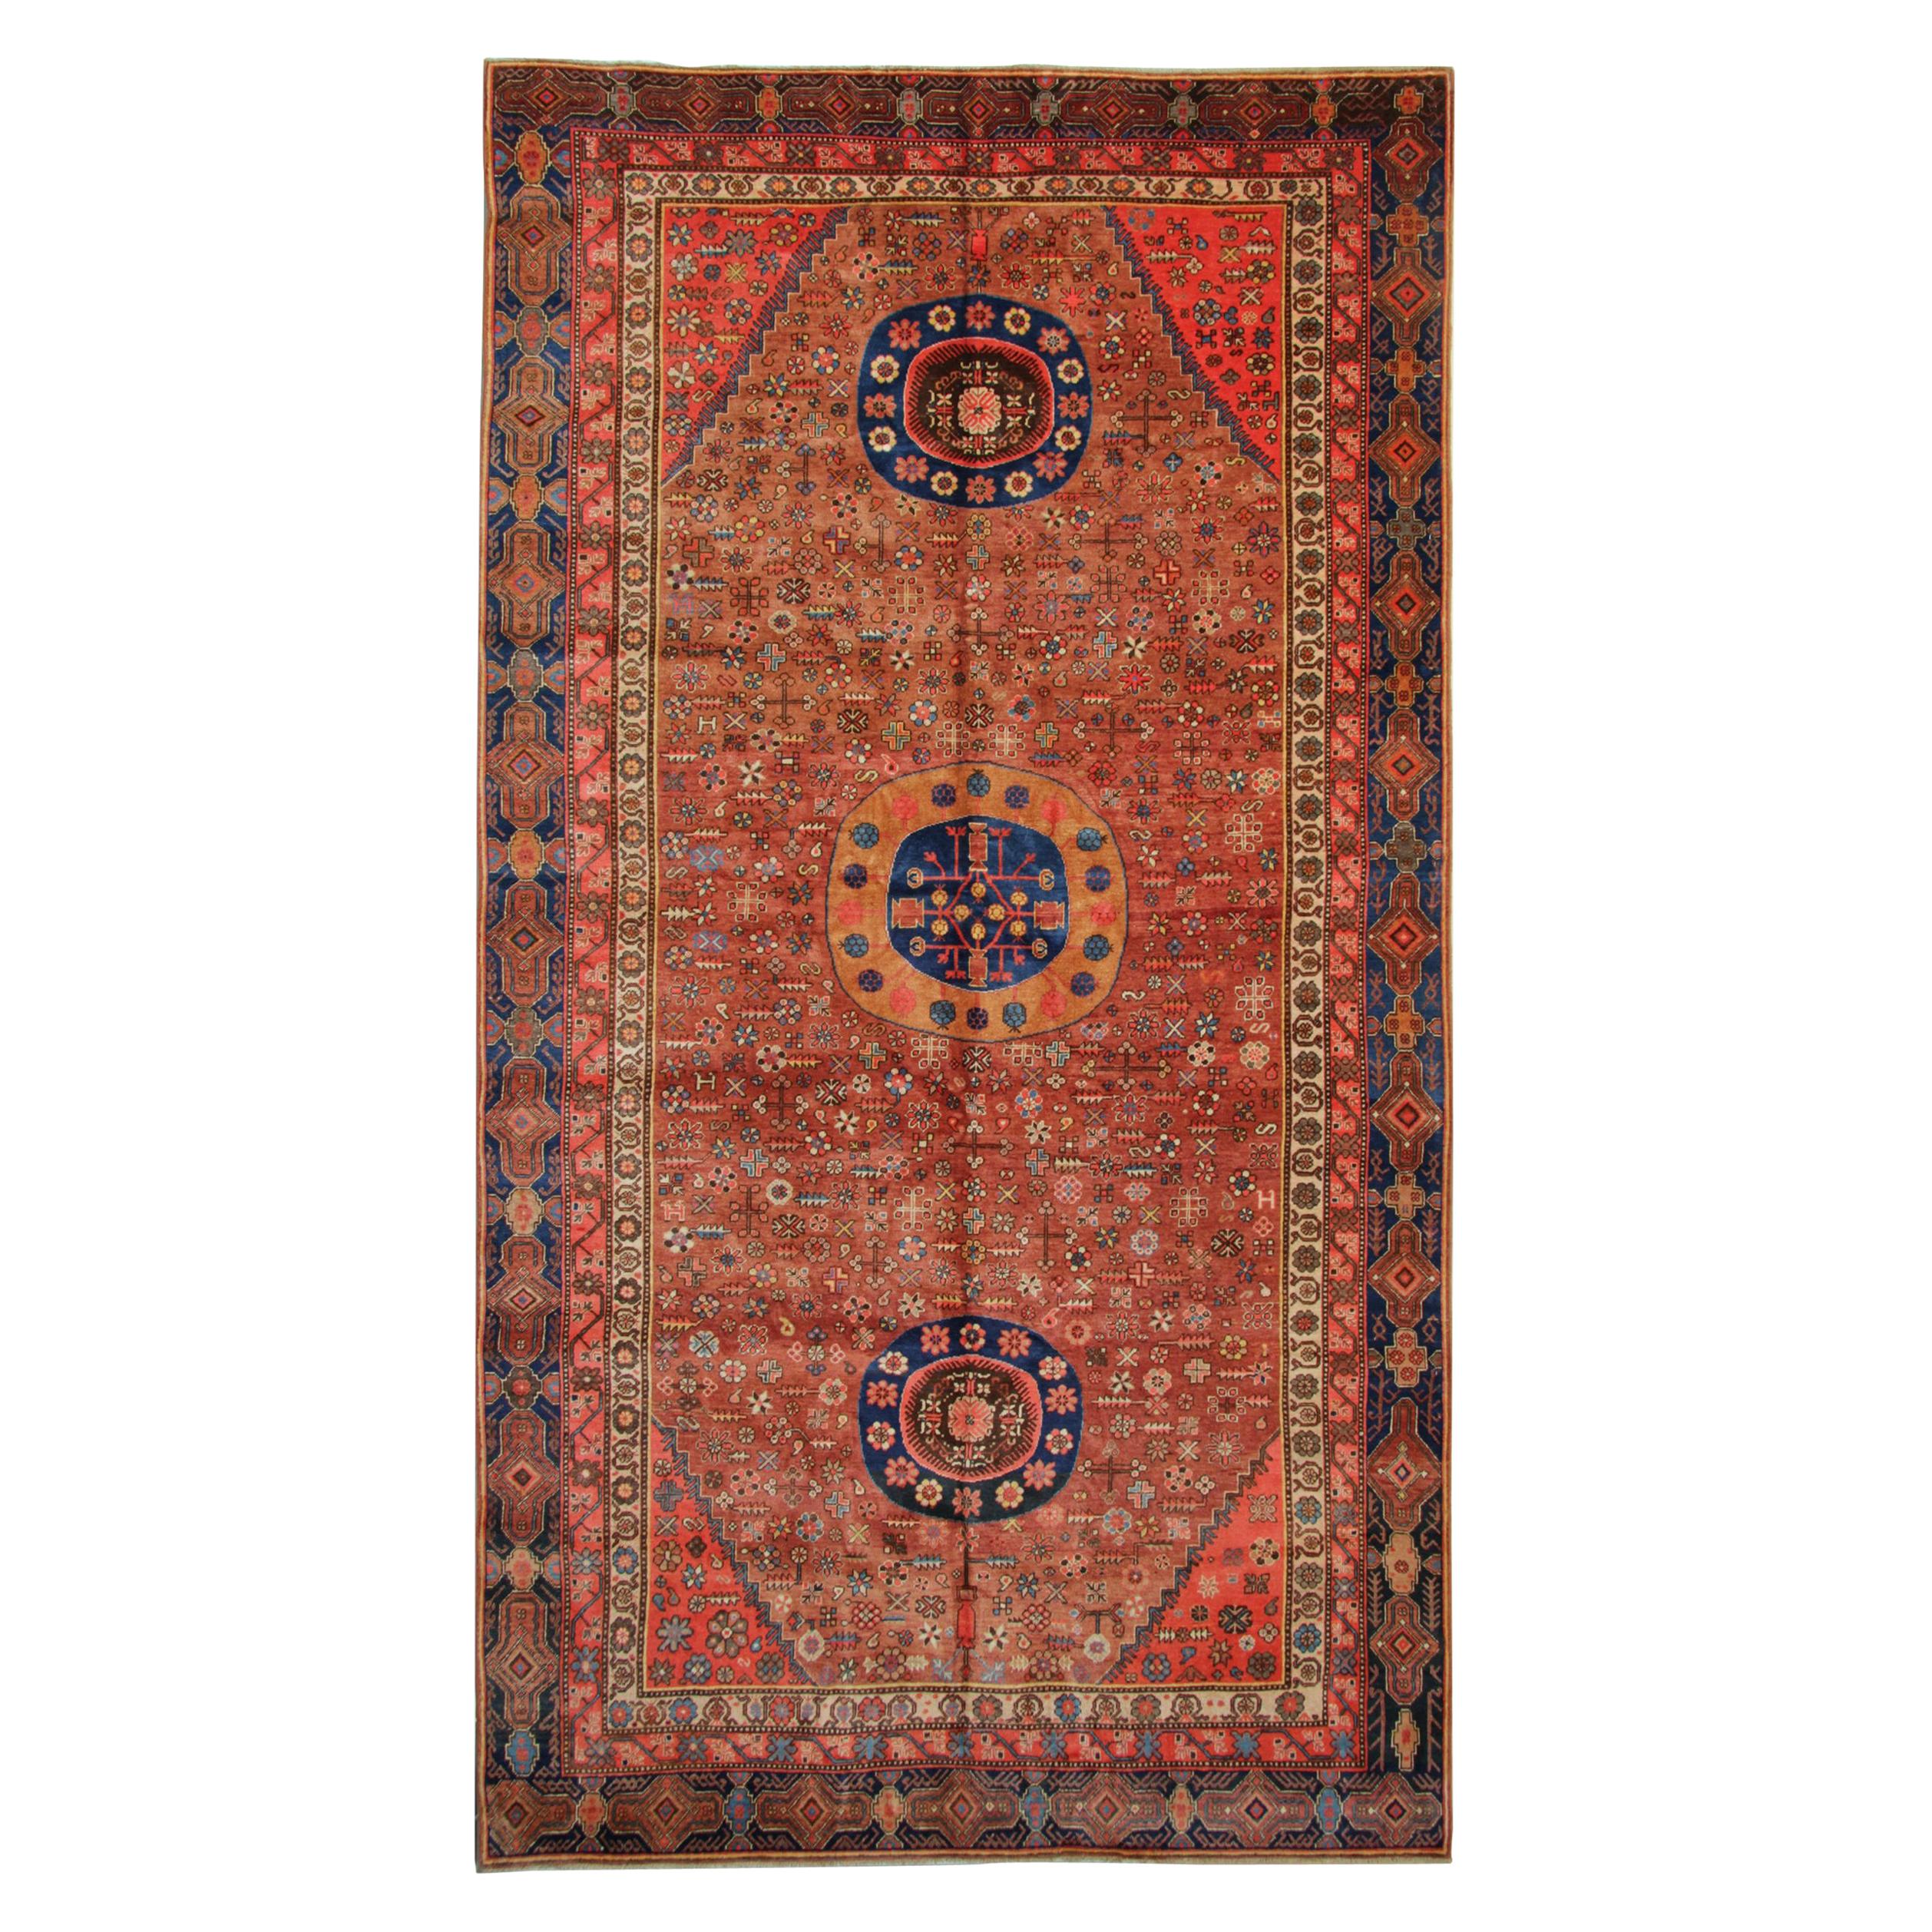 Rare Antique Rugs, Oriental Rugs Traditional Red Handmade Carpet from Khotan